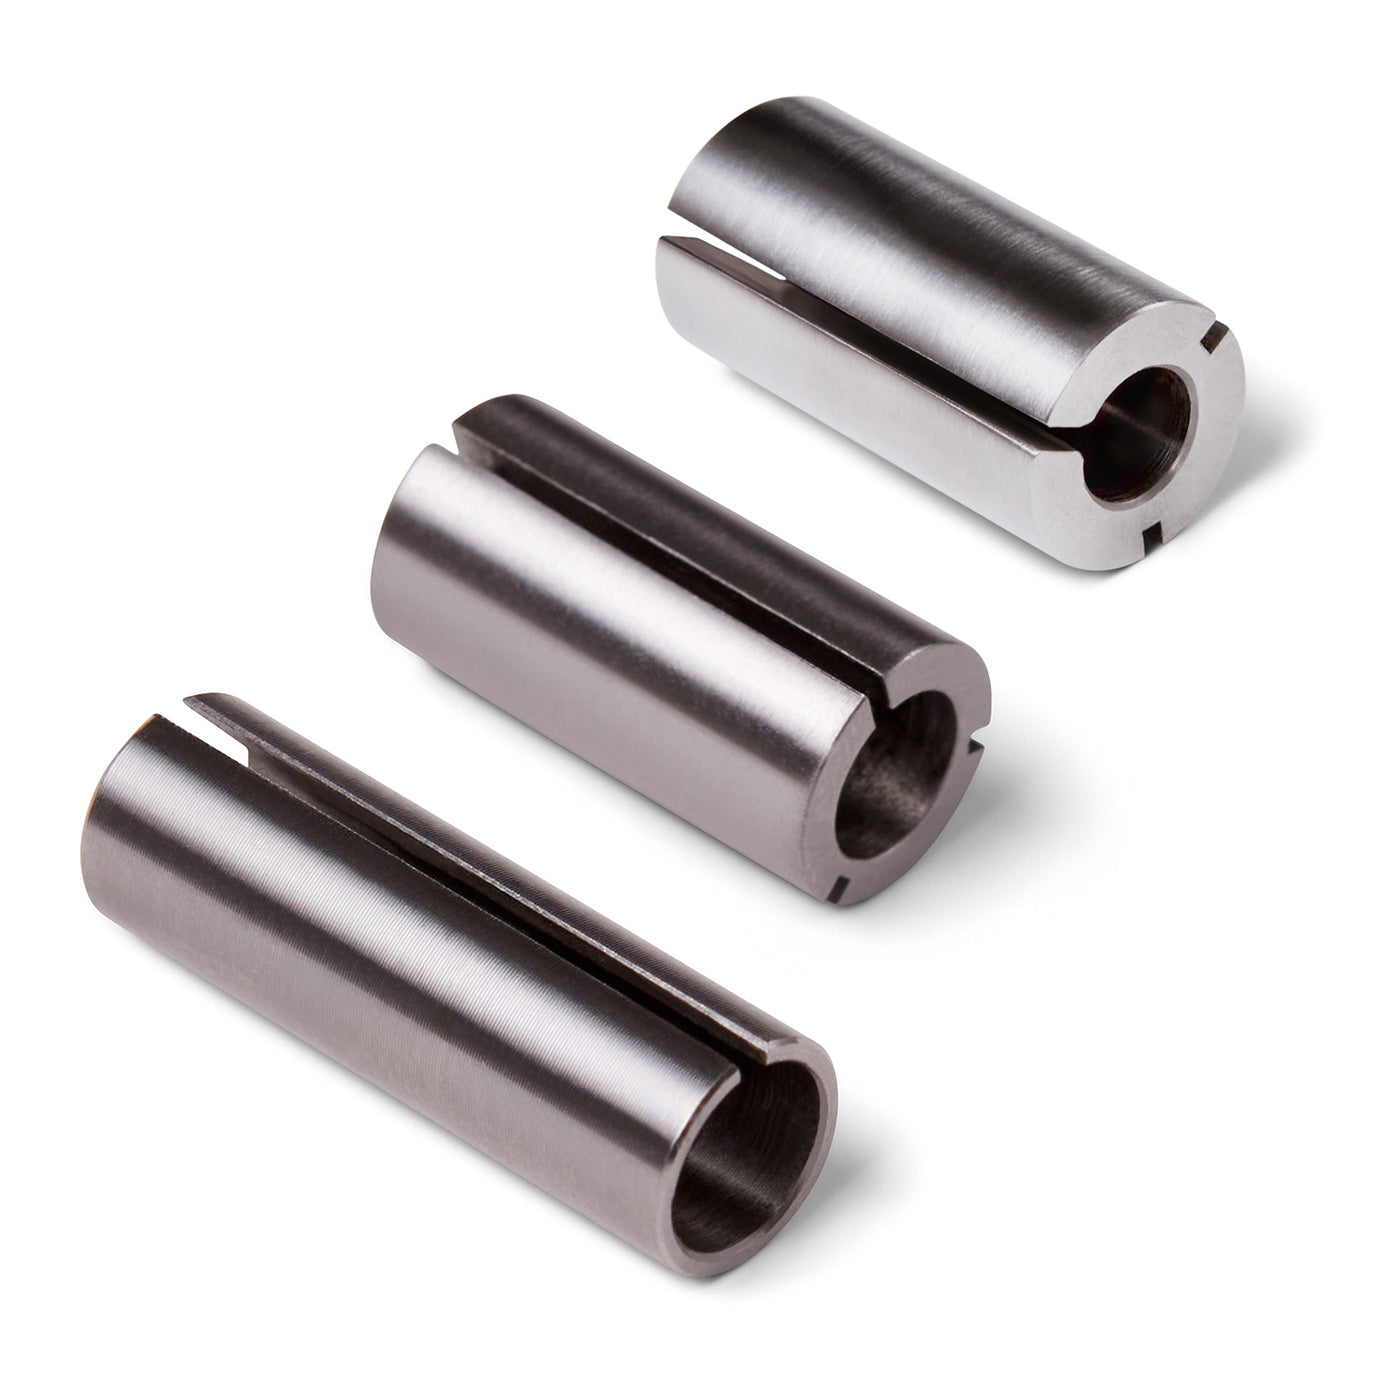 Collet Reduction Sleeves - Set of 3